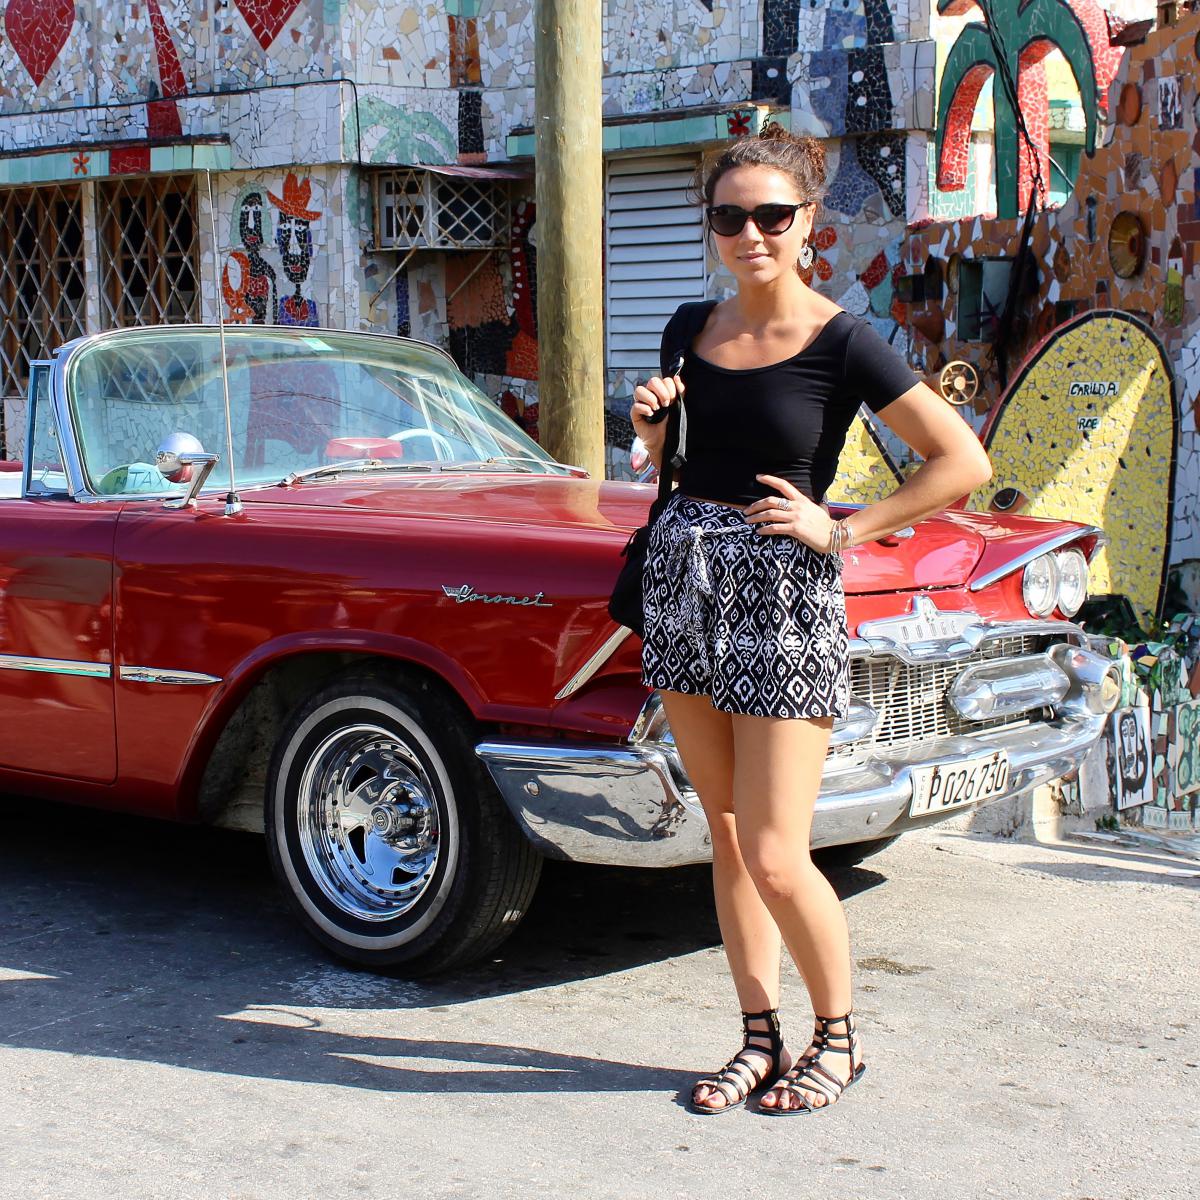 A Penn State Behrend student stands near an old car in Cuba.